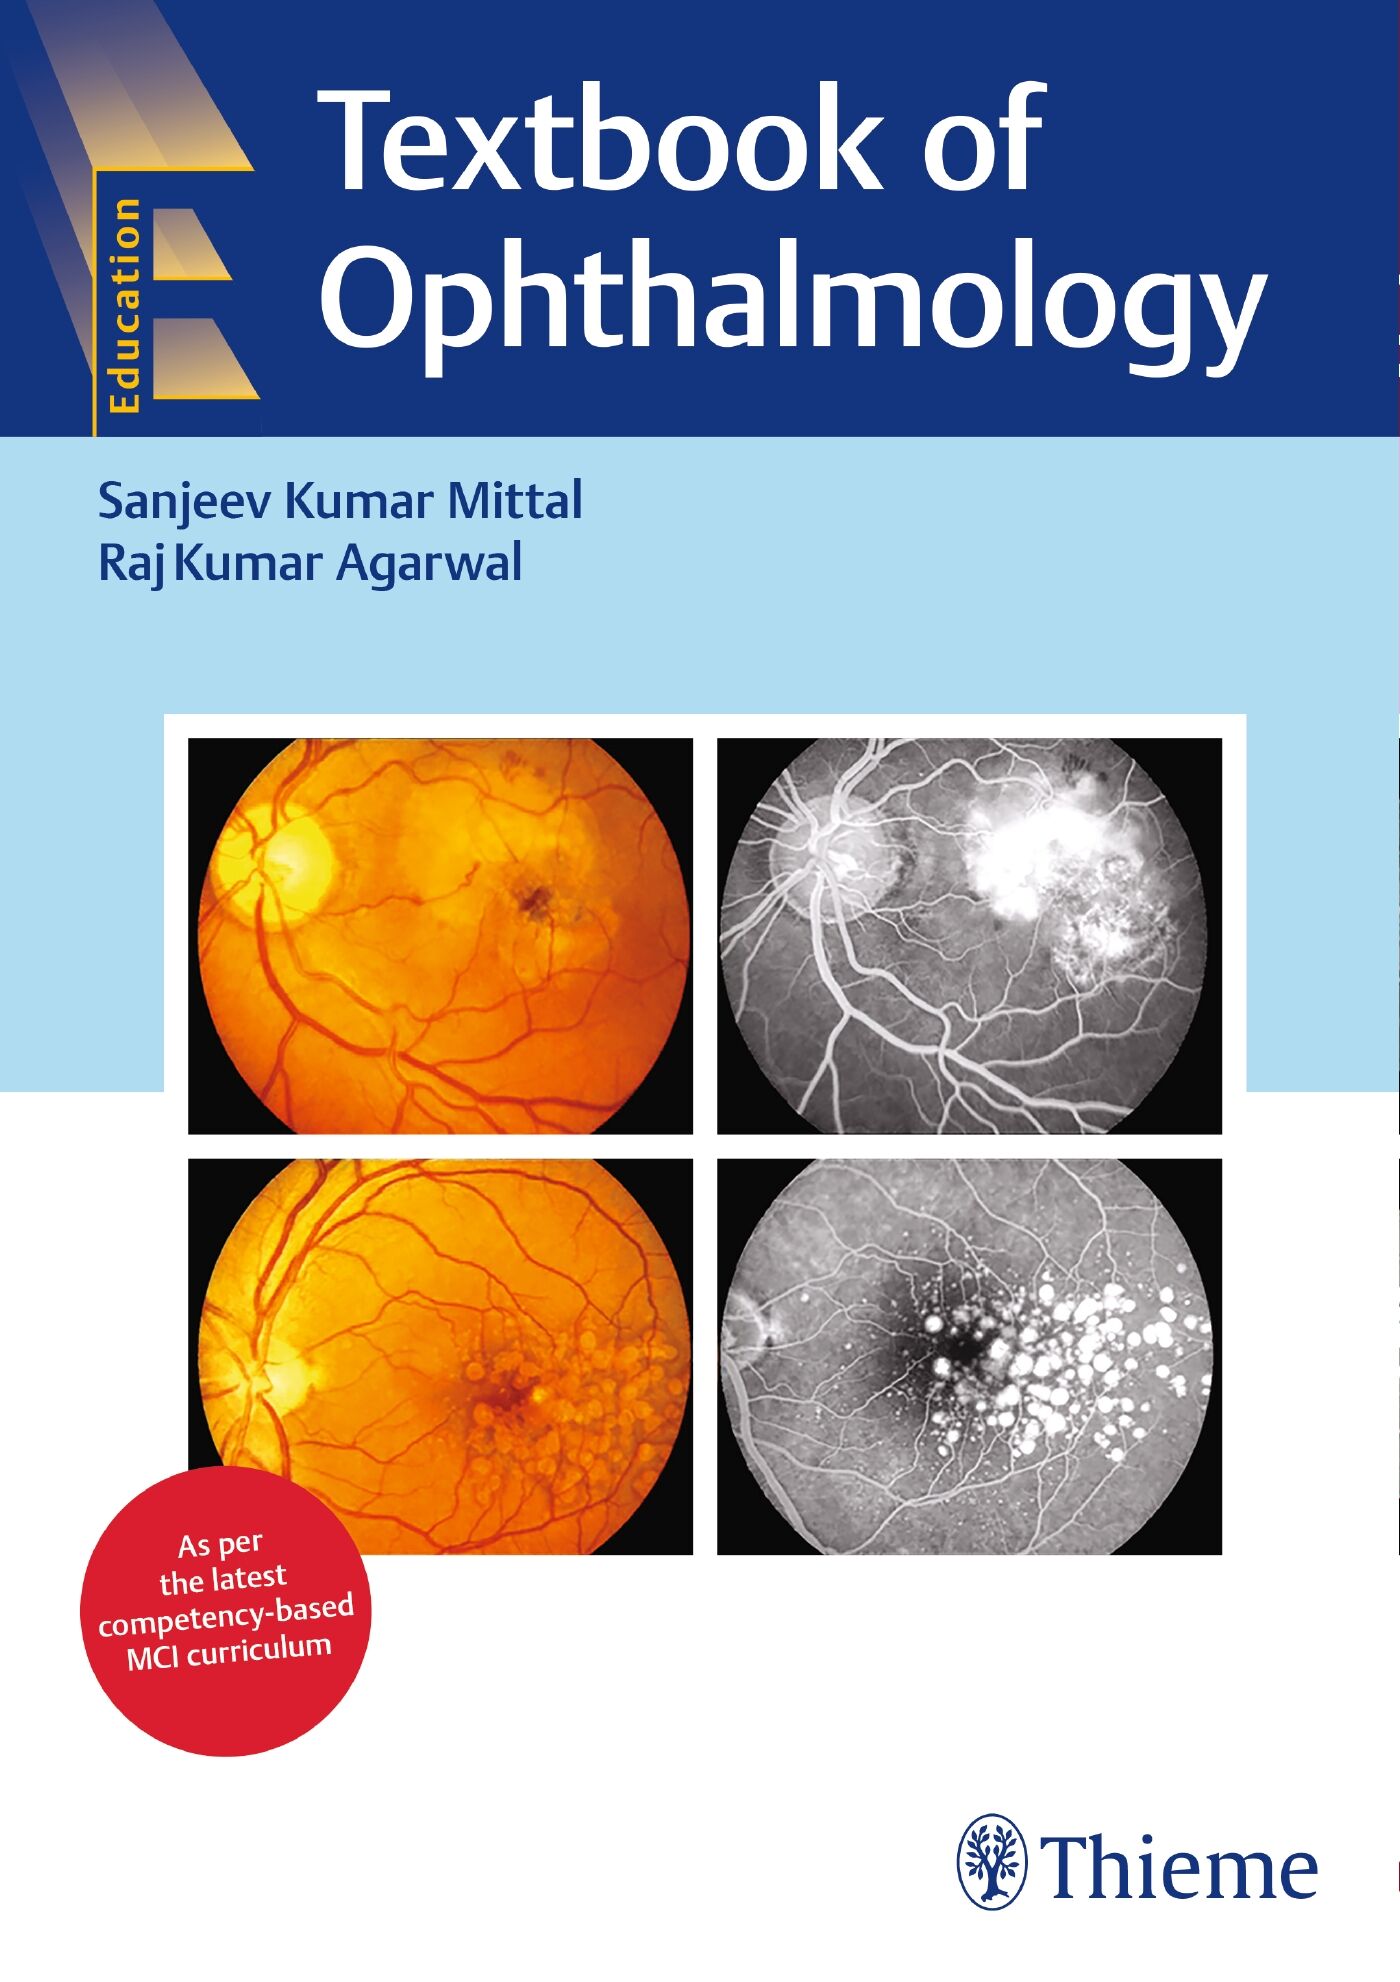 Textbook of Ophthalmology, 9789388257787